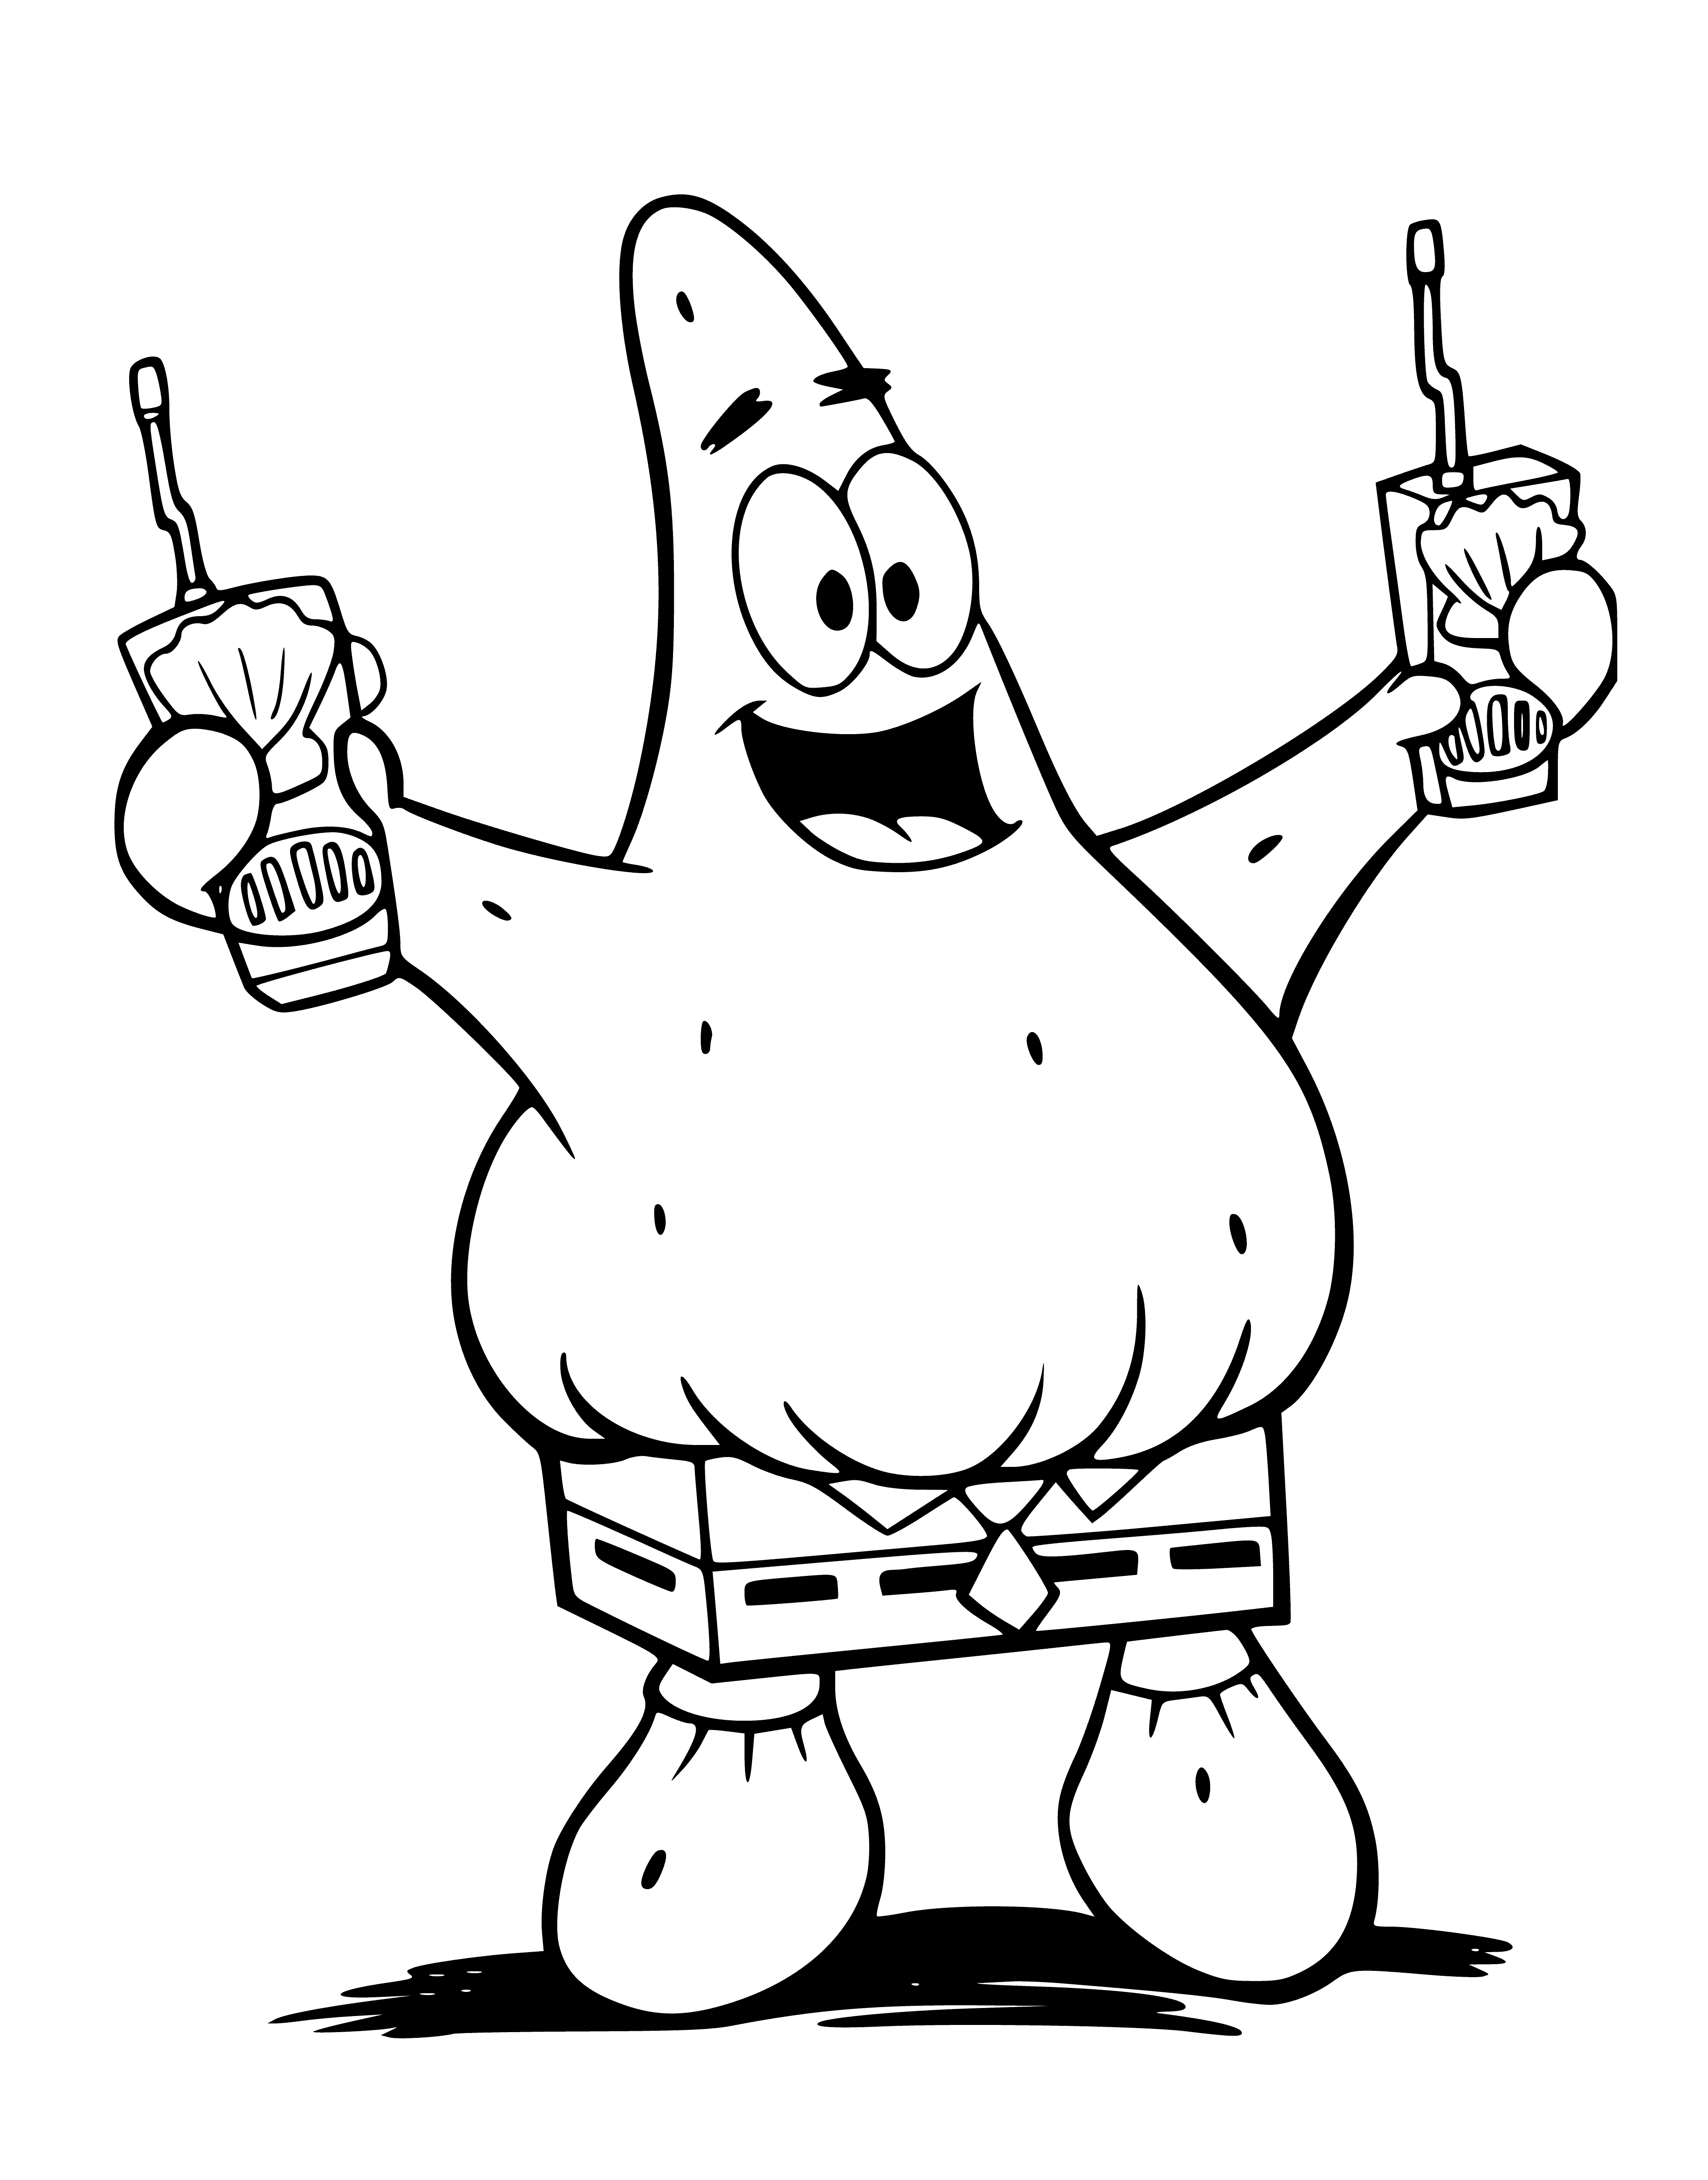 Patrick with the radio coloring page